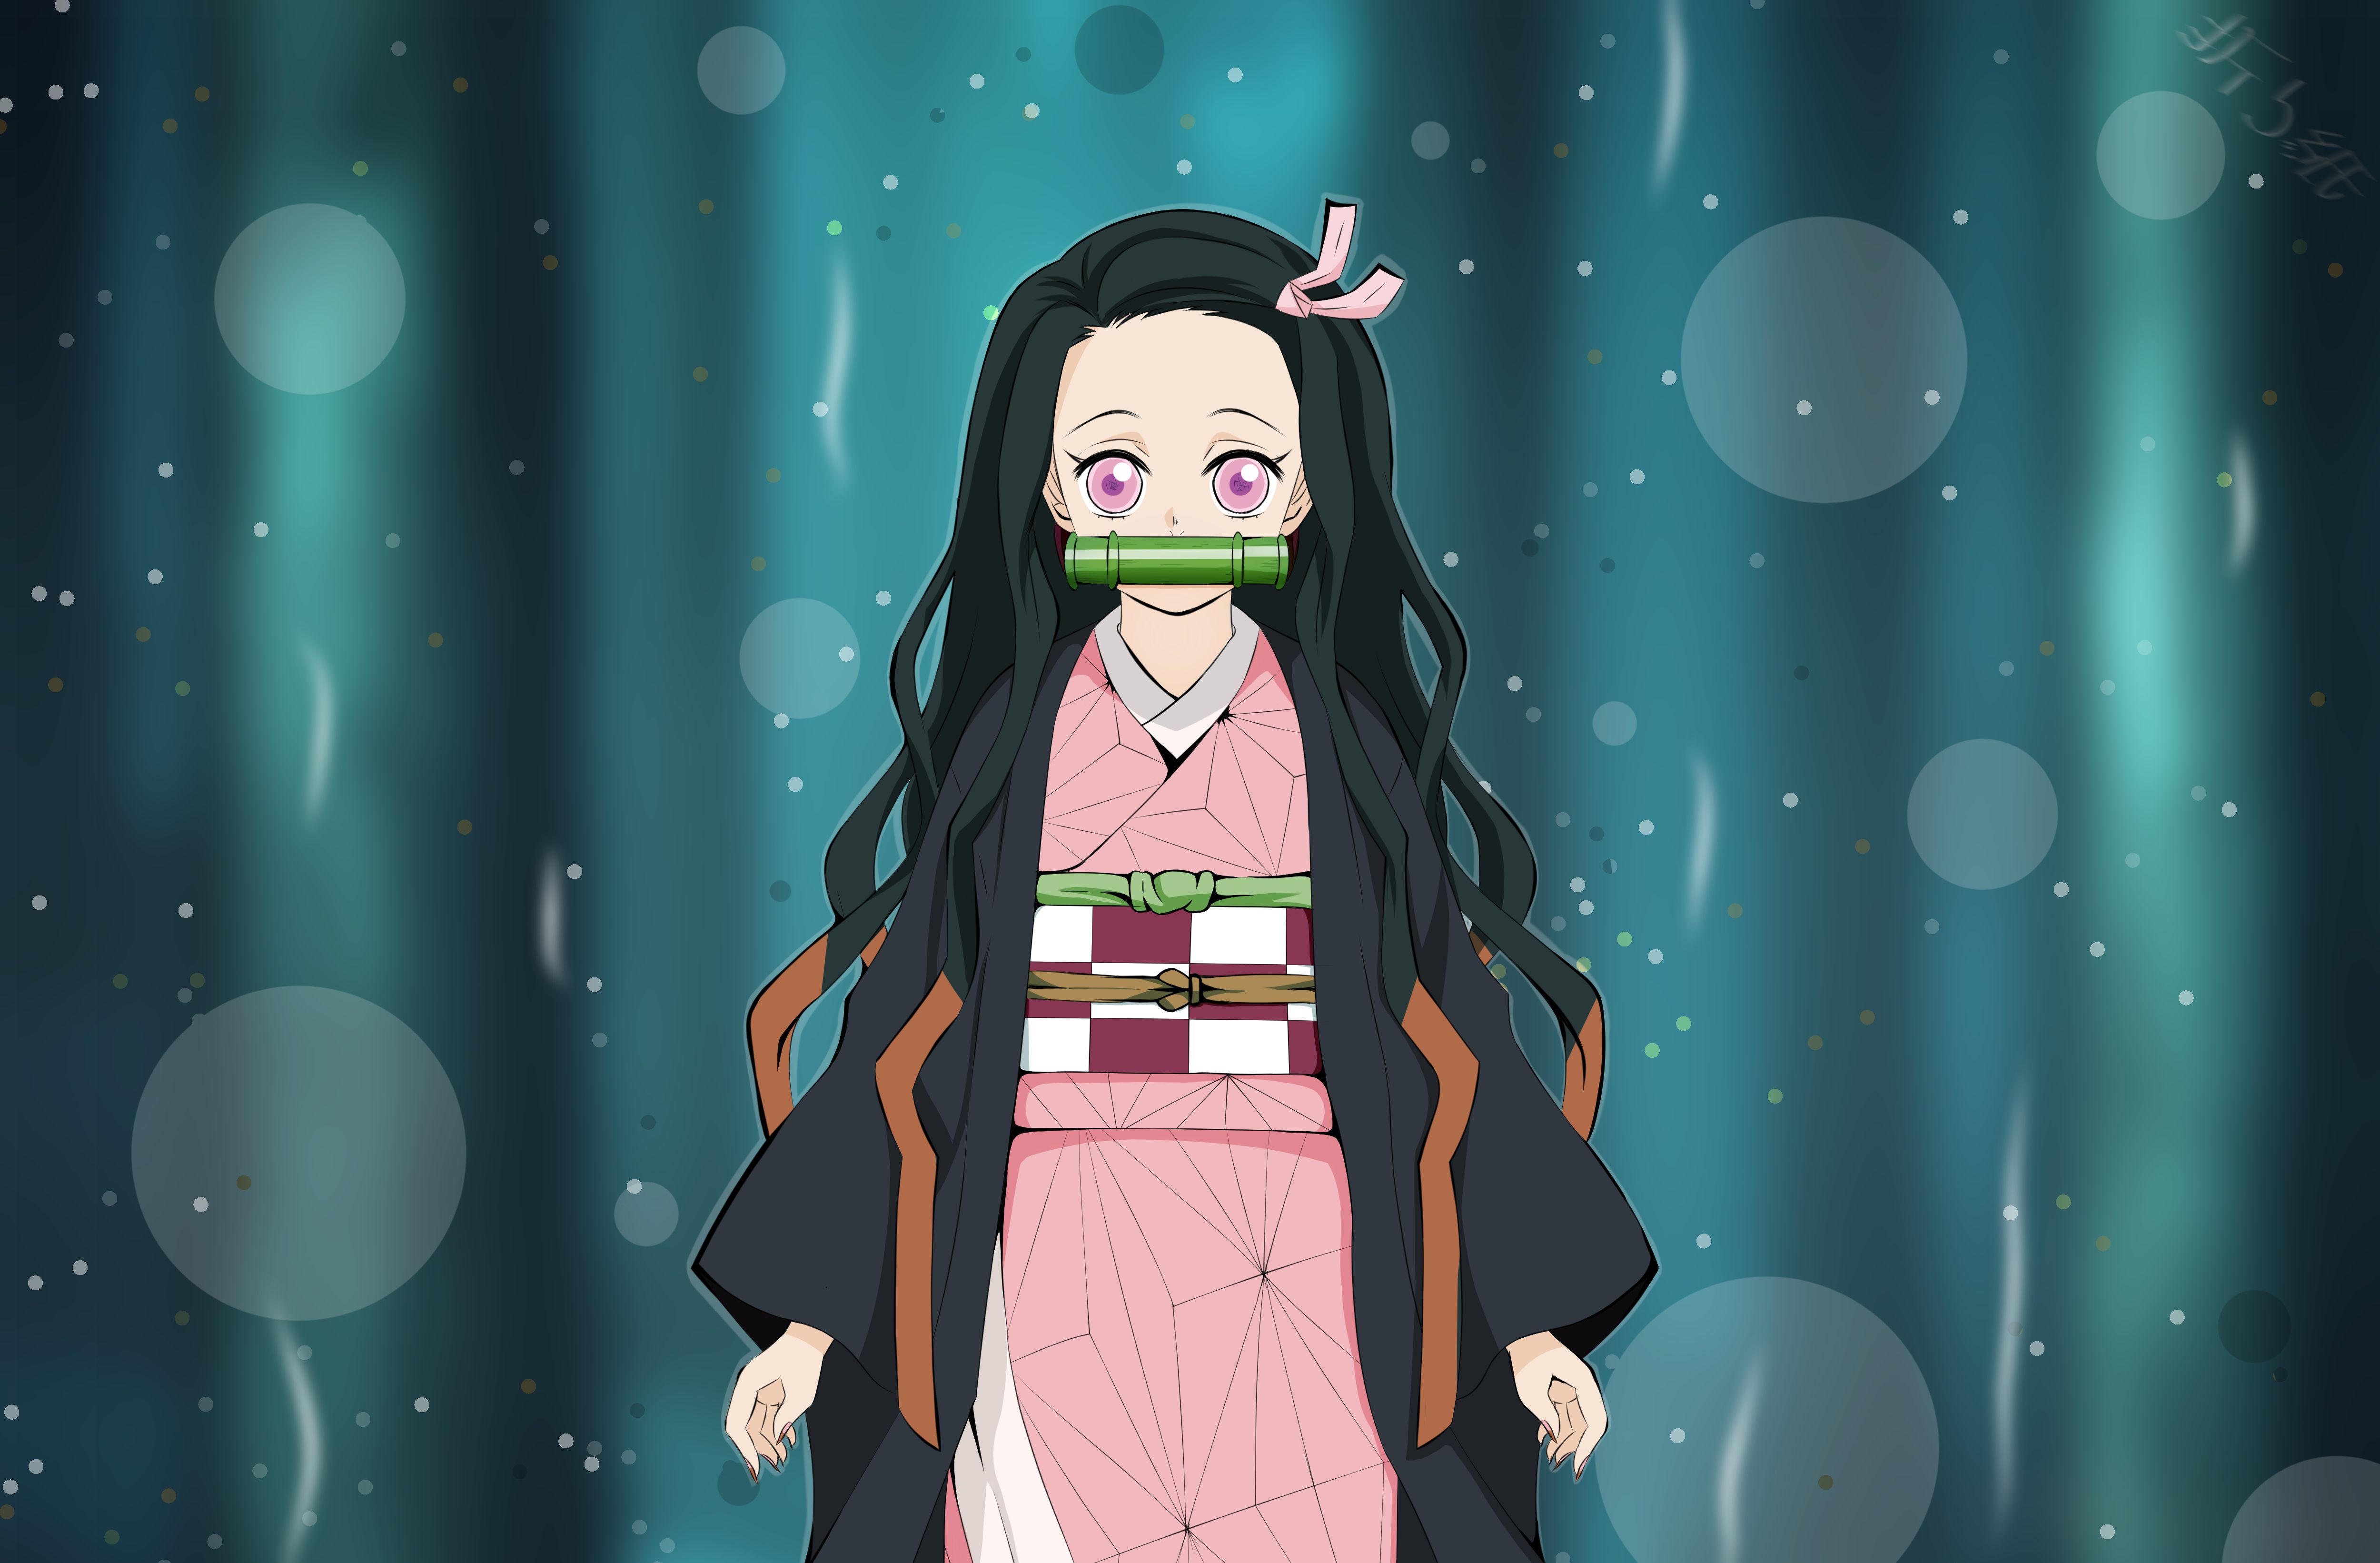 A character from the anime Demon Slayer - Nezuko